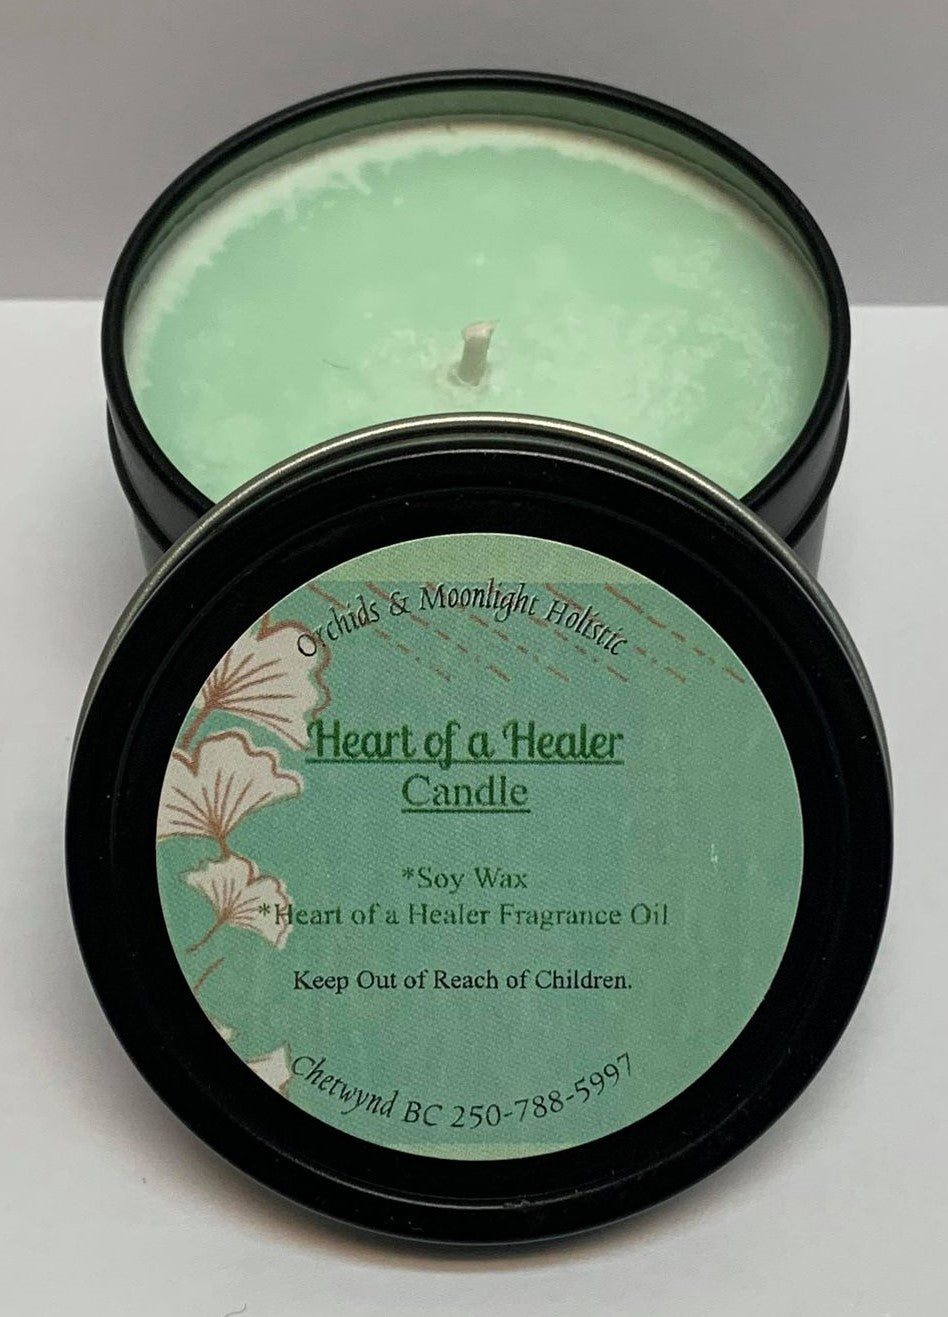 Heart of a Healer Candle